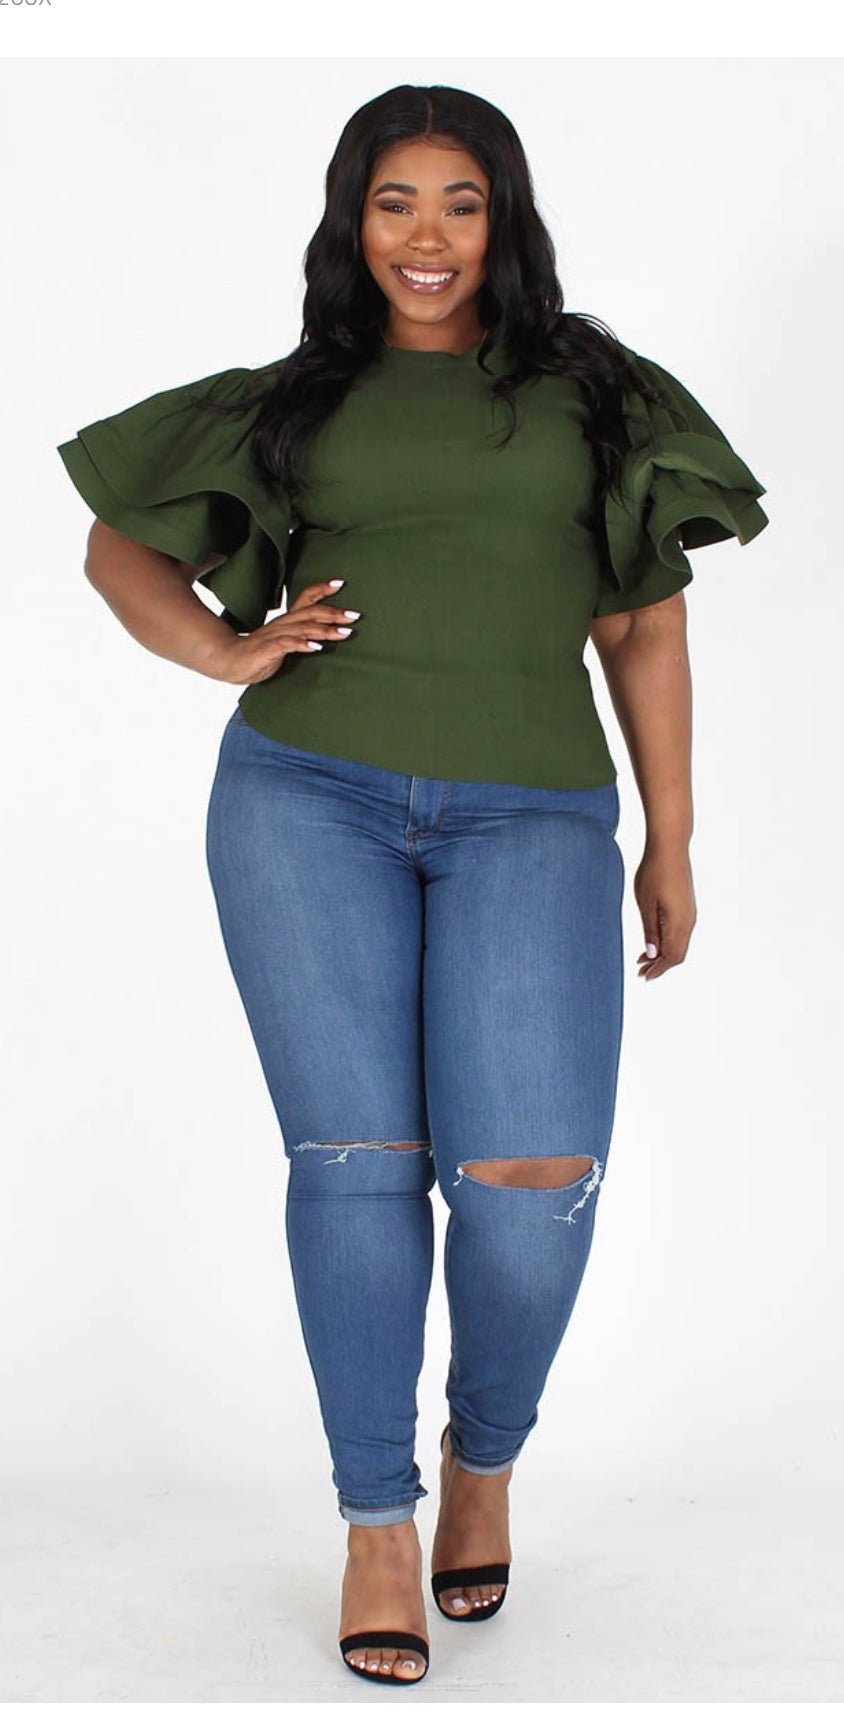 Tiffany Ruffled Sleeve Top (9 different Color options)